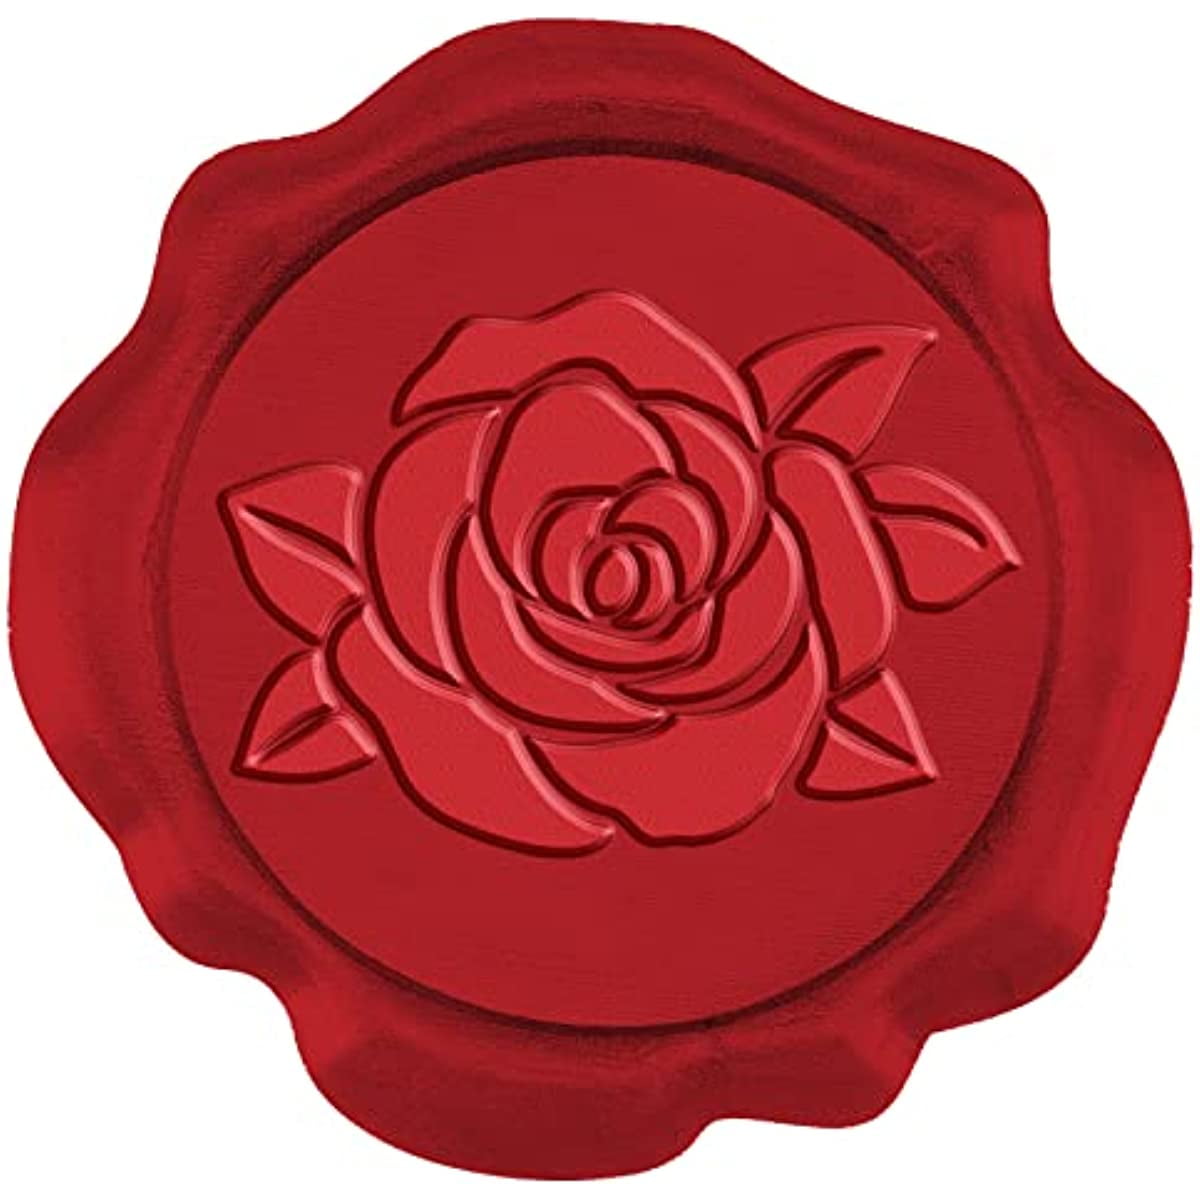 Ready Made Wax Seals Stickers - Rose Self-Adhesive Wax Seal Stickers - Style 07